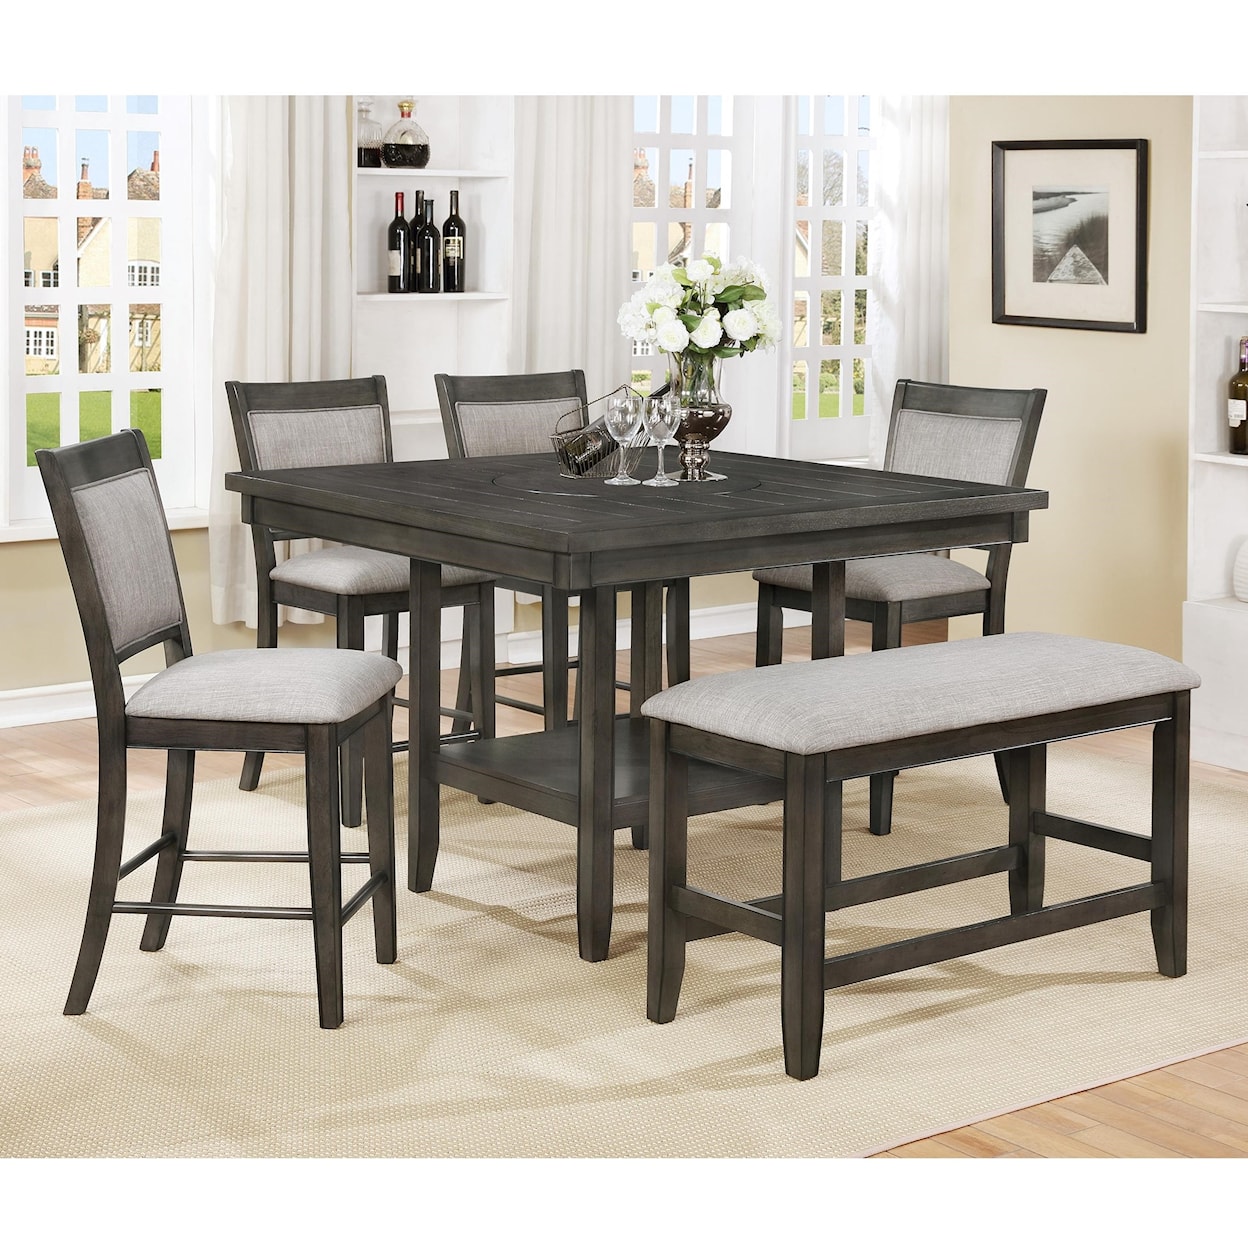 CM Fulton 6-Pc Counter Height Table, Chair & Bench Set